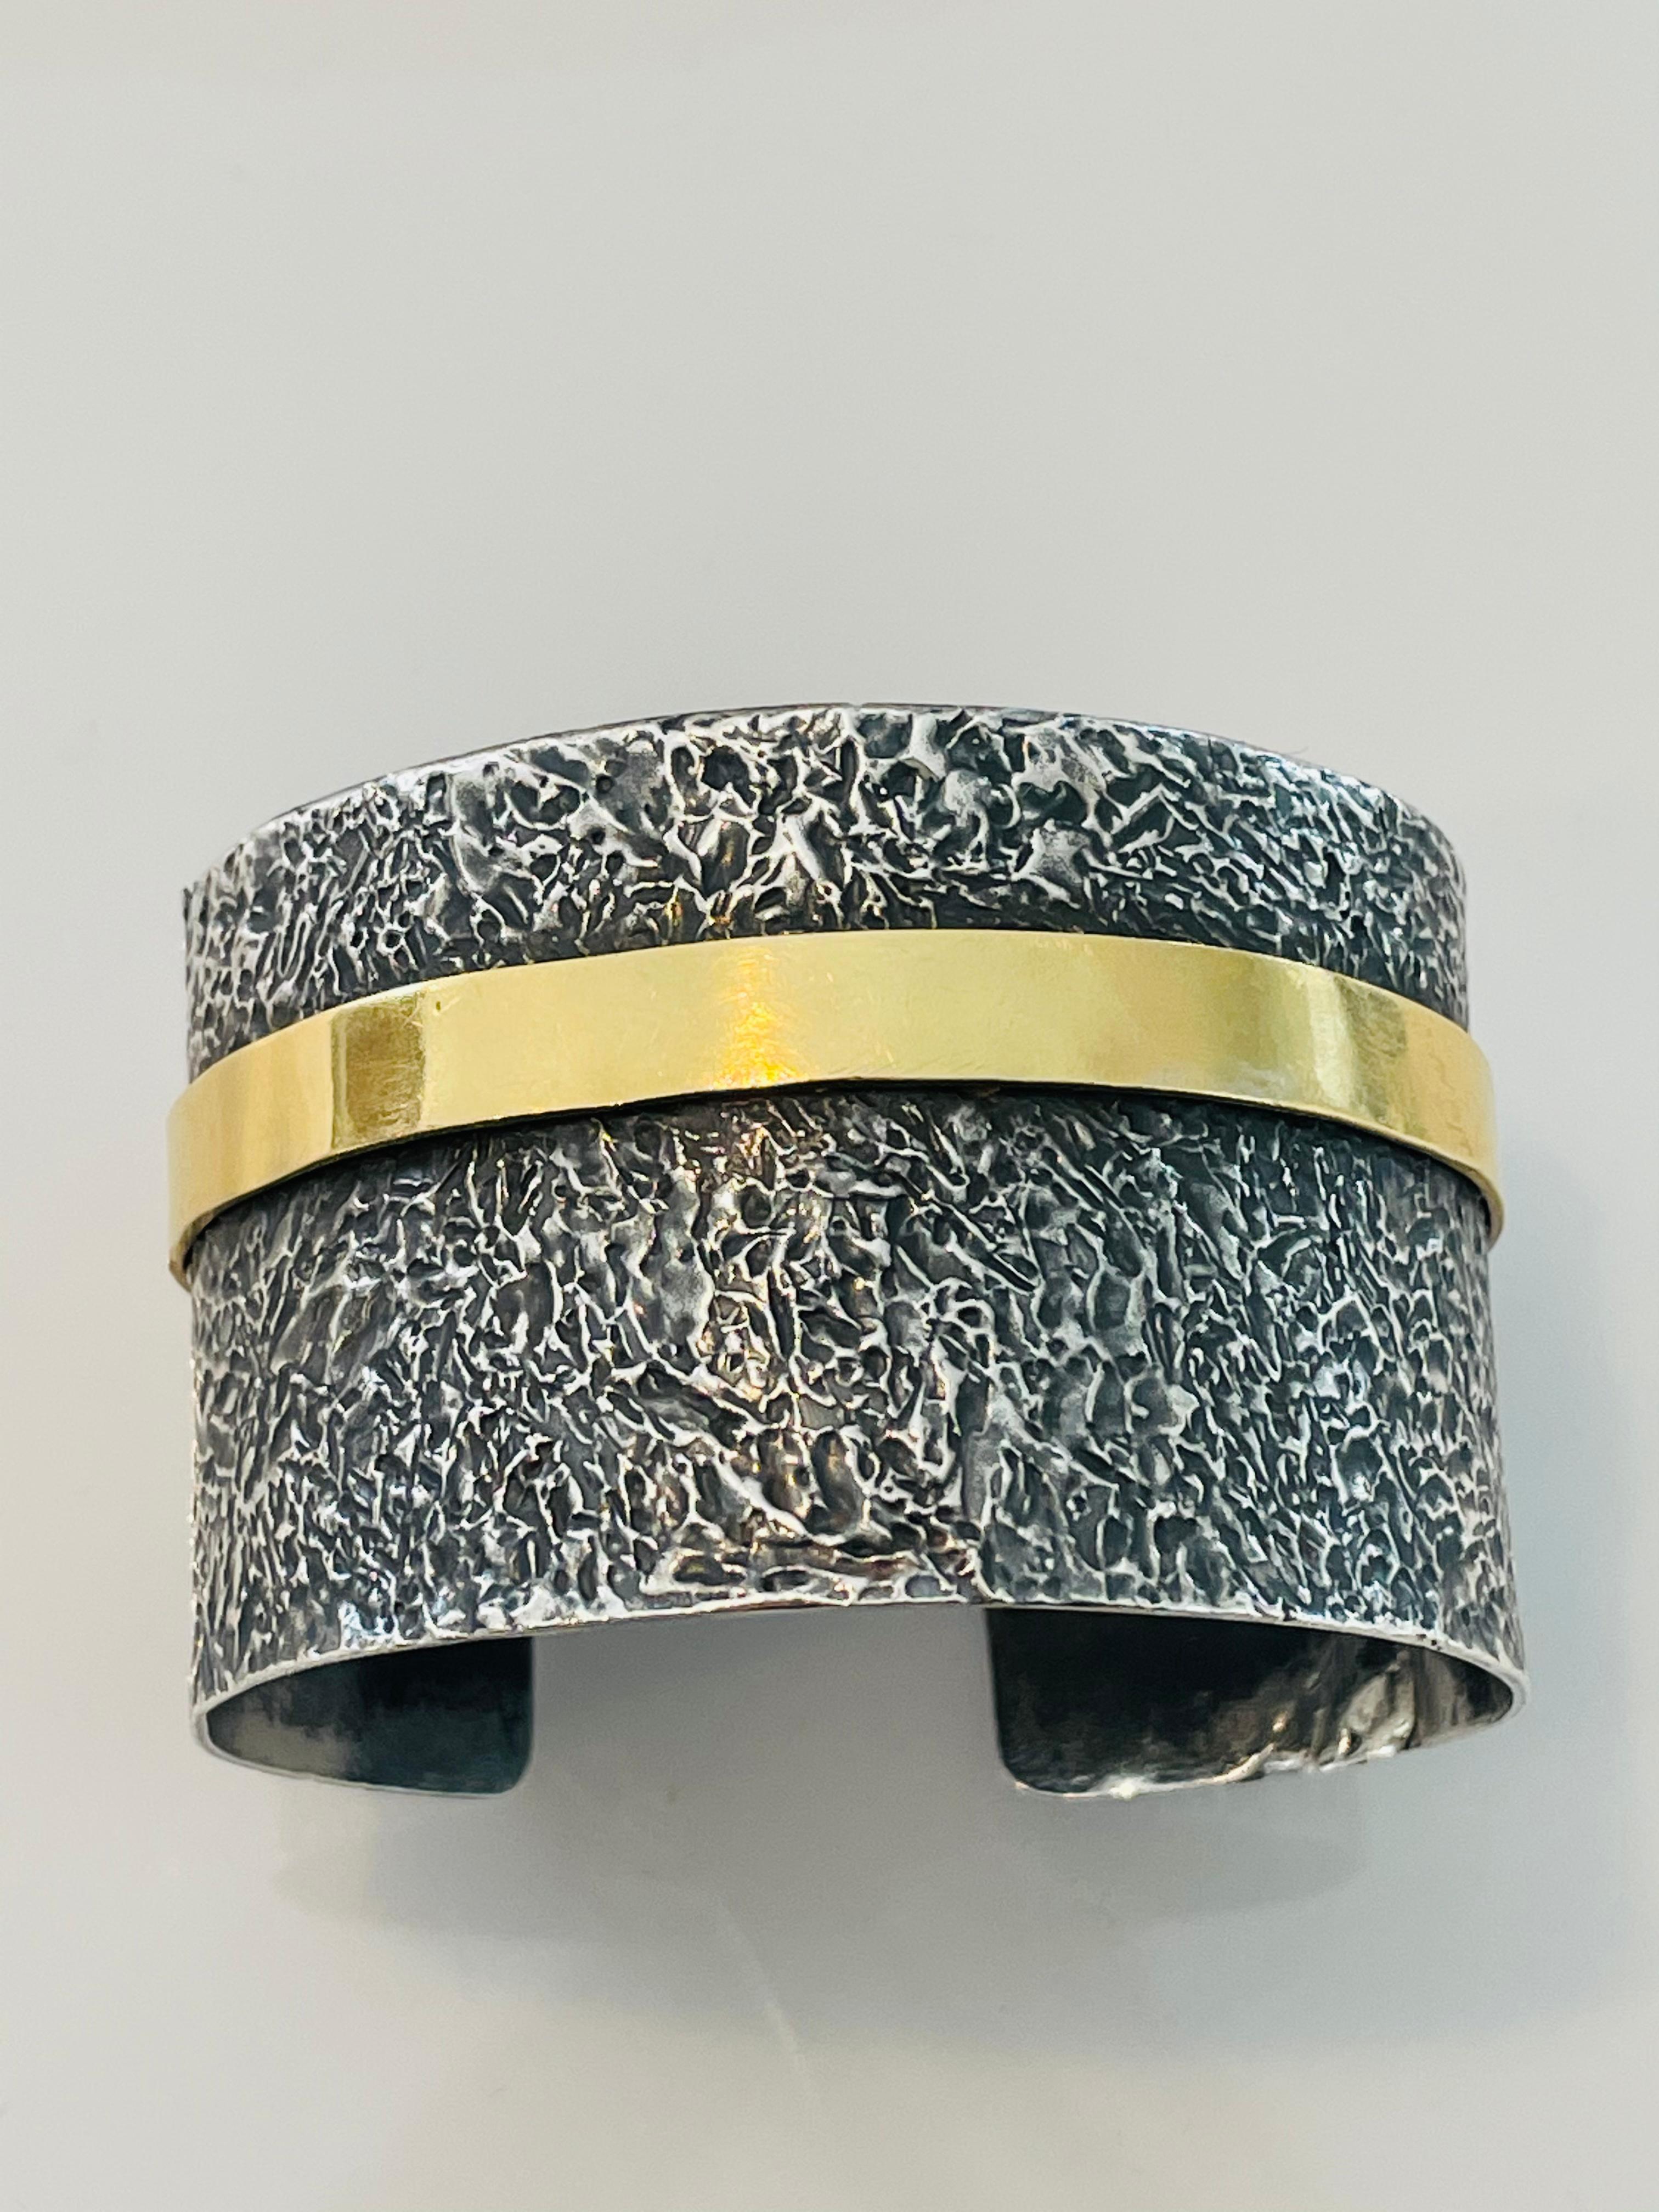 Blackened silver cuff with 22k gold band. Perfect mix of metals for an edgy, classy look! Hand textured, modern classic, one of a kind. Transitions effortlessly from day to night, wear casual or with a LBD. Pairs perfectly with pieces from The